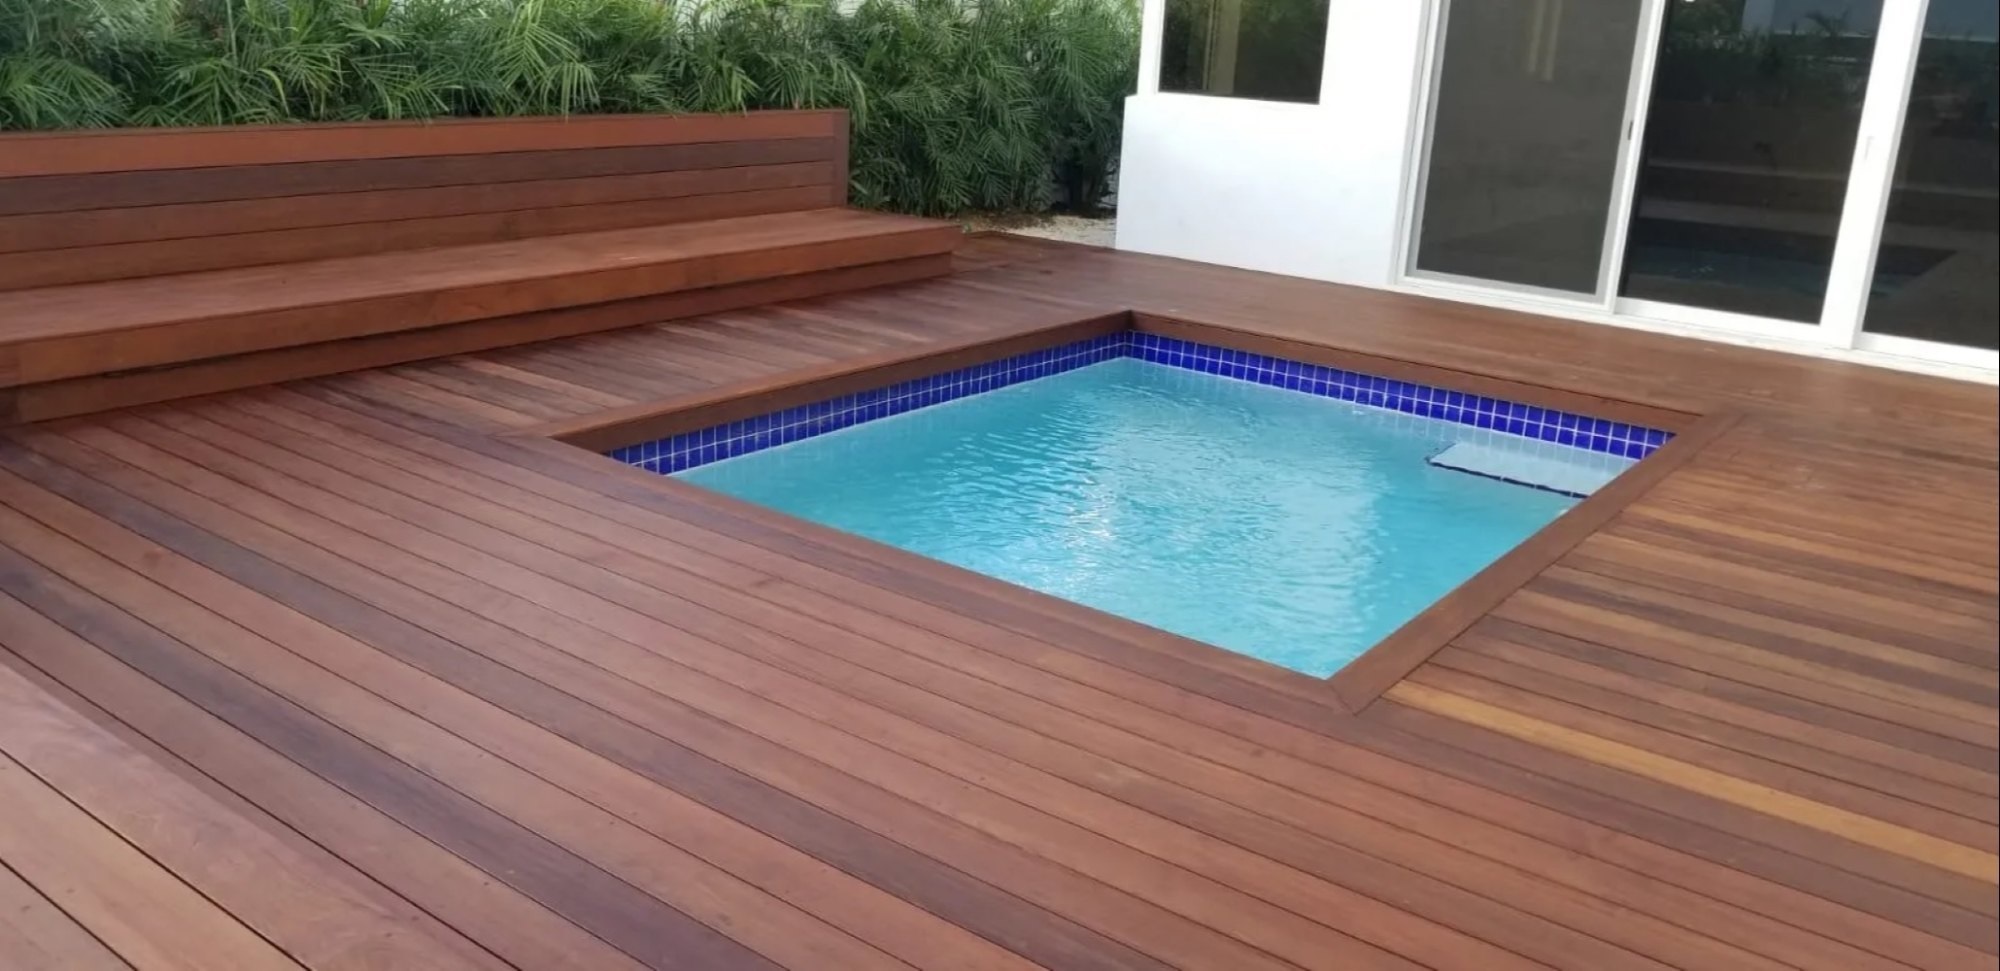 Ipe Wood Decking: Witnessing The Masterpiece Of Nature